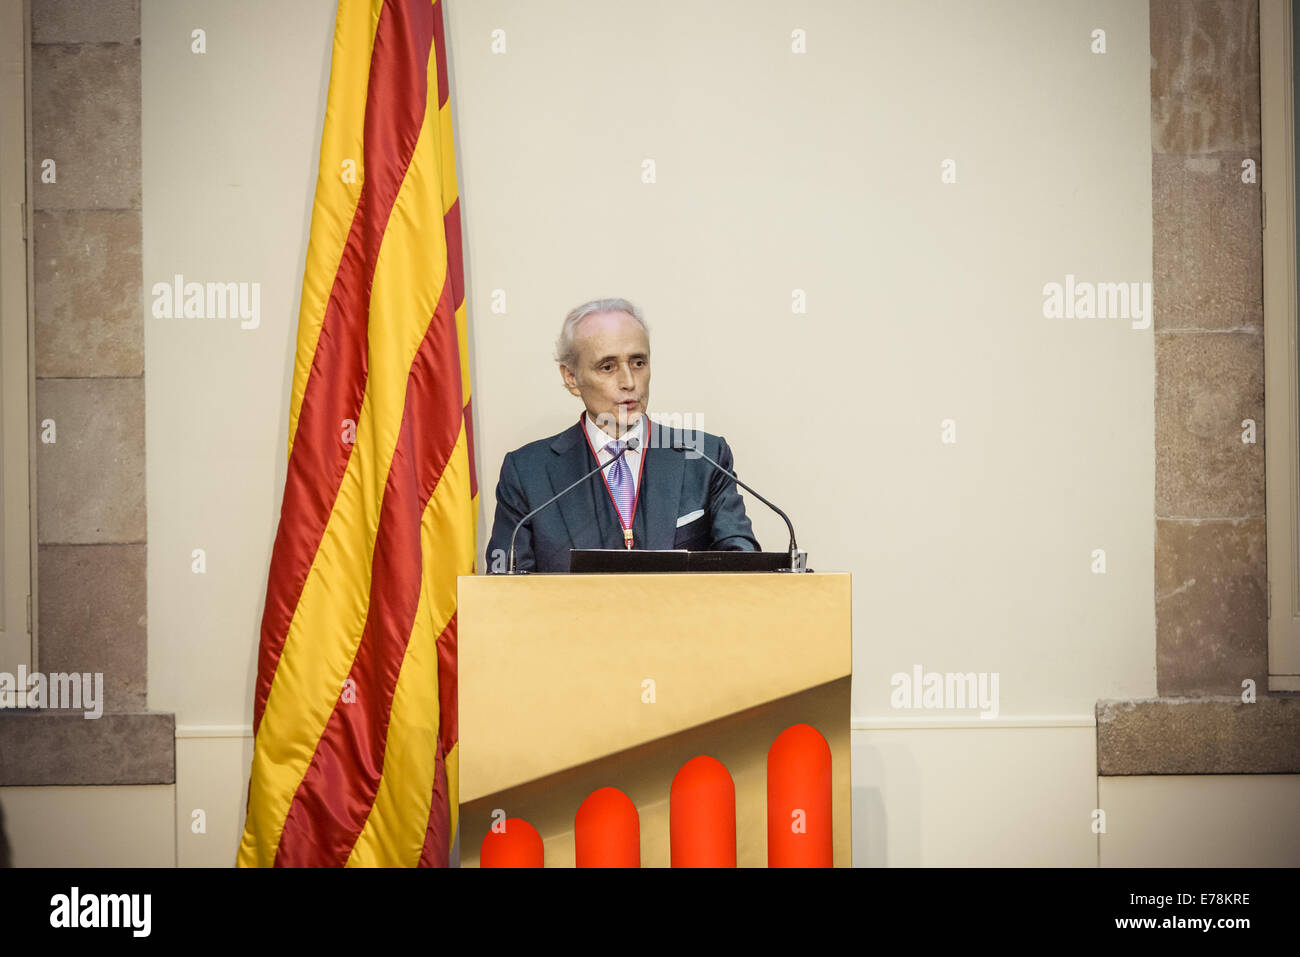 Sept. 9, 2014 - JOSEP CARRERAS I COLL, better known as JOSE CARRERAS, fresh bearer of the medal of honor in gold of the Catalan parliament for his artistic career and humanitarian work with his leukemia foundation, holds a speech during the honor ceremony Credit:  Matthias Oesterle/ZUMA Wire/ZUMAPRESS.com/Alamy Live News Stock Photo